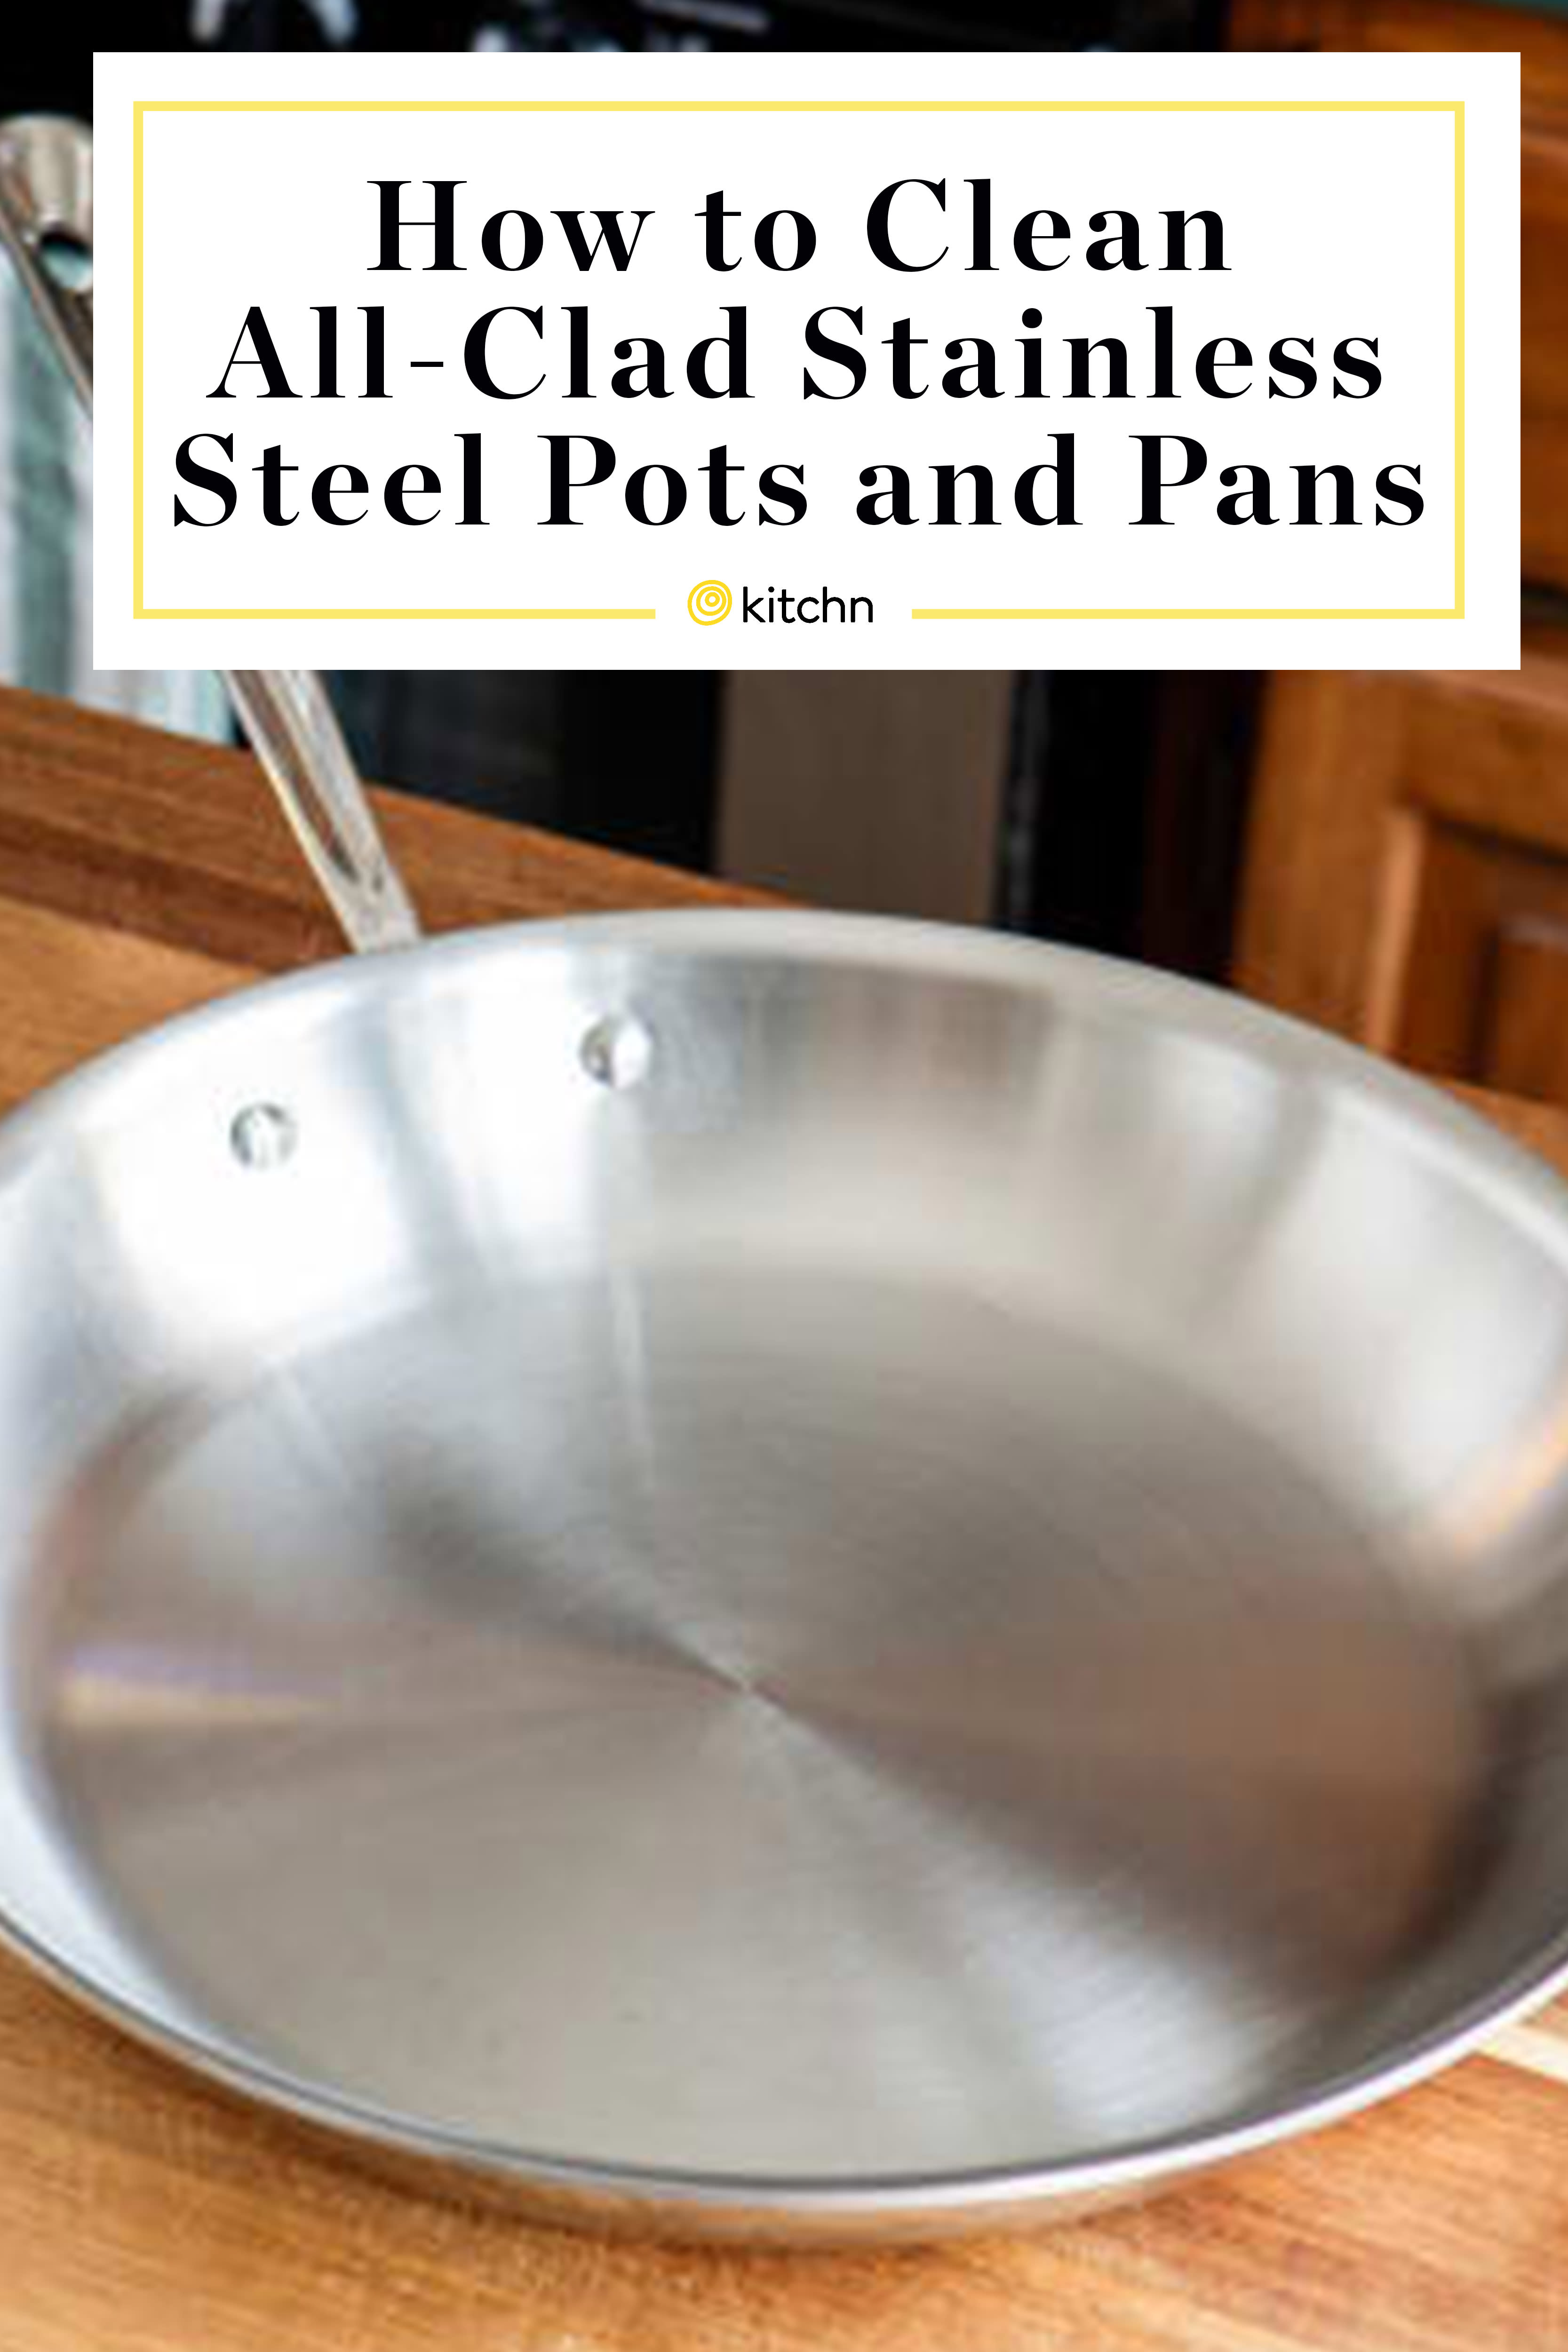 how to season all-clad stainless steel pan